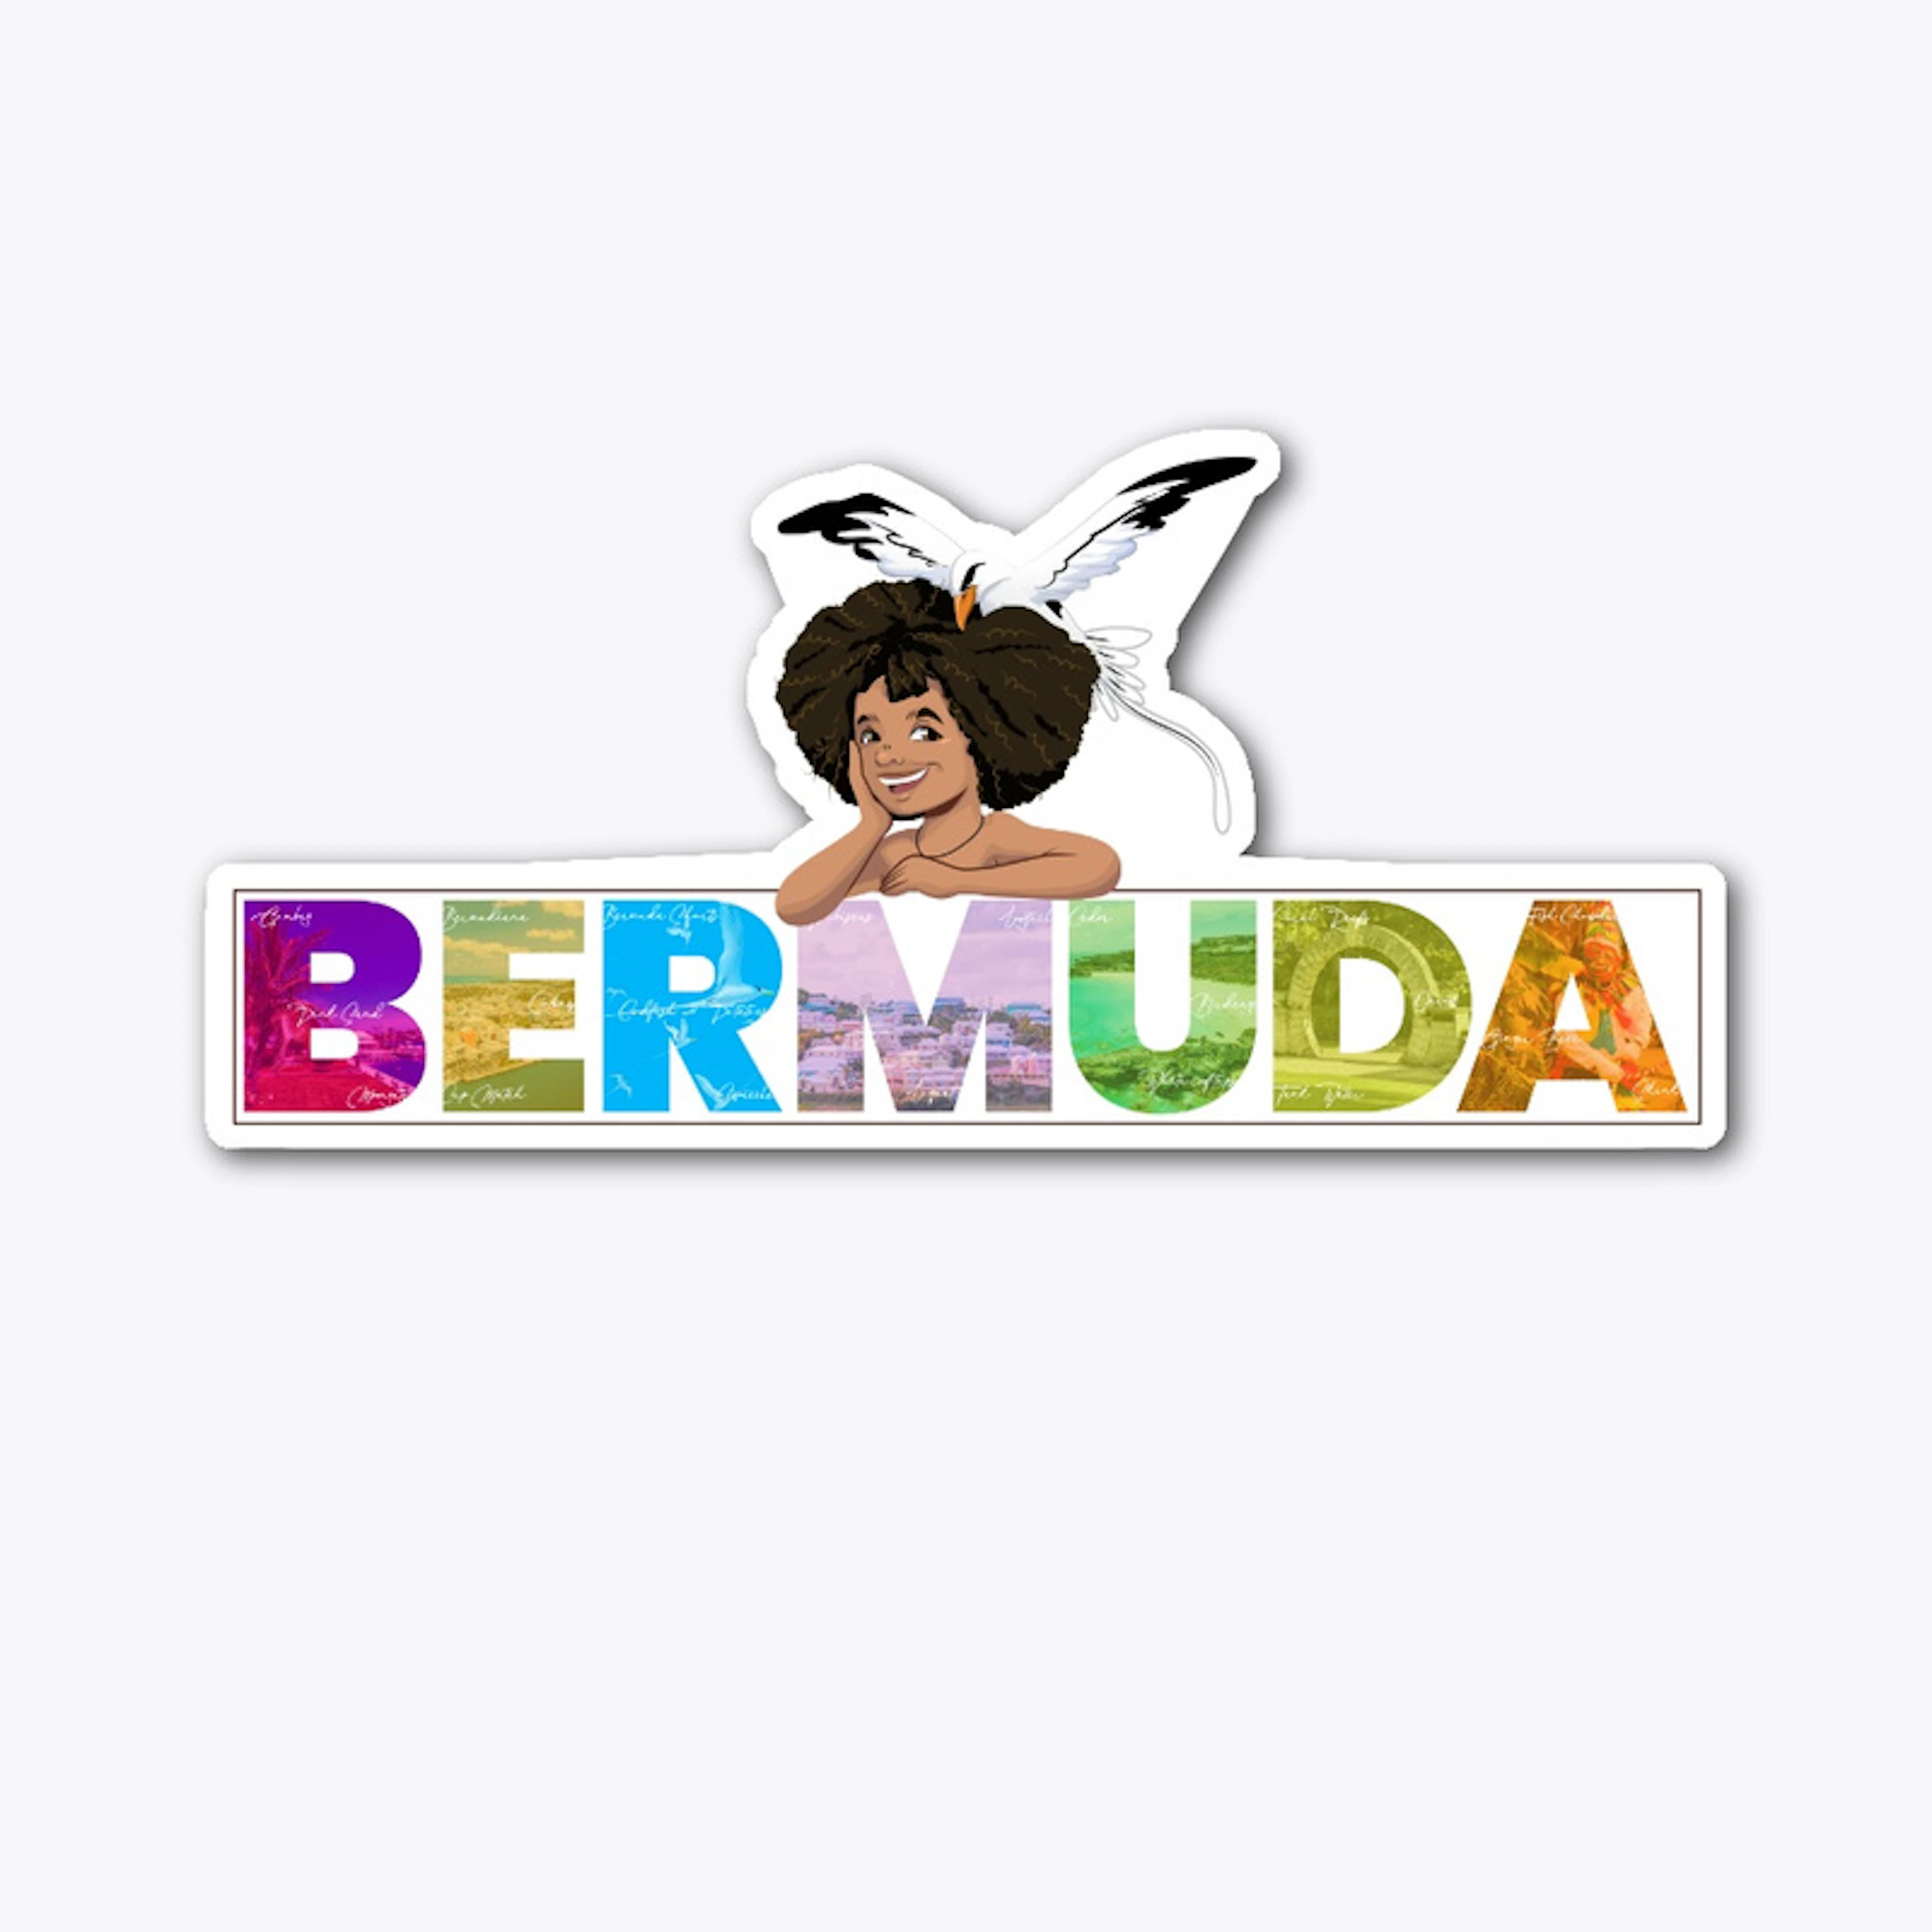 Official Bermuda Marquee V3